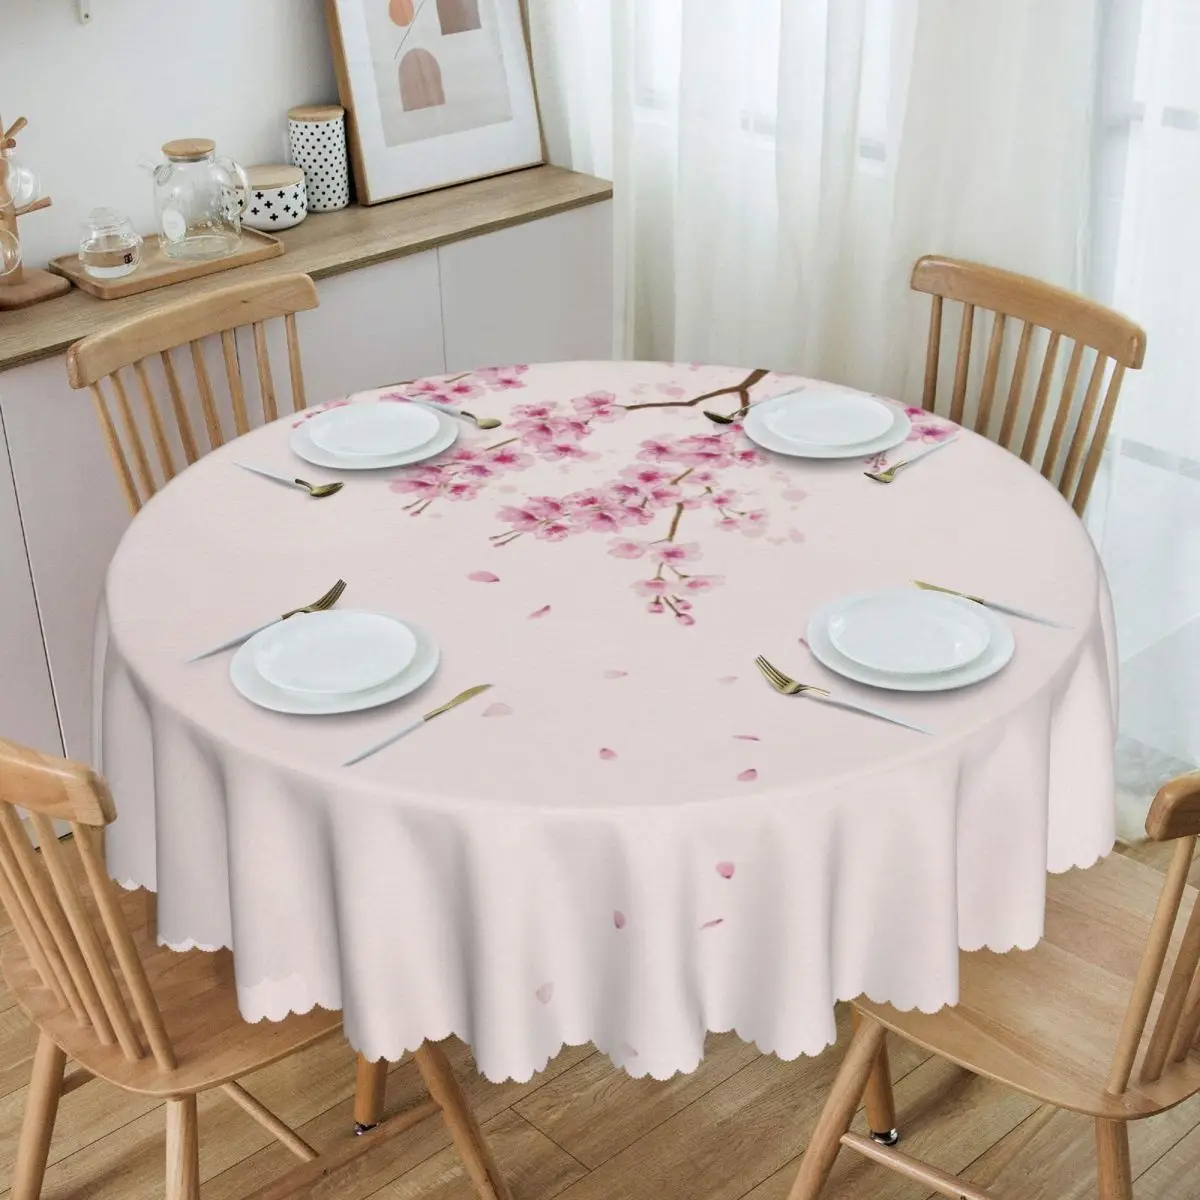 

Cherry Blossom Sakura Floral Pattern Tablecloth Round Waterproof Japanese Flowers Table Cover Cloth for Banquet 60 inch